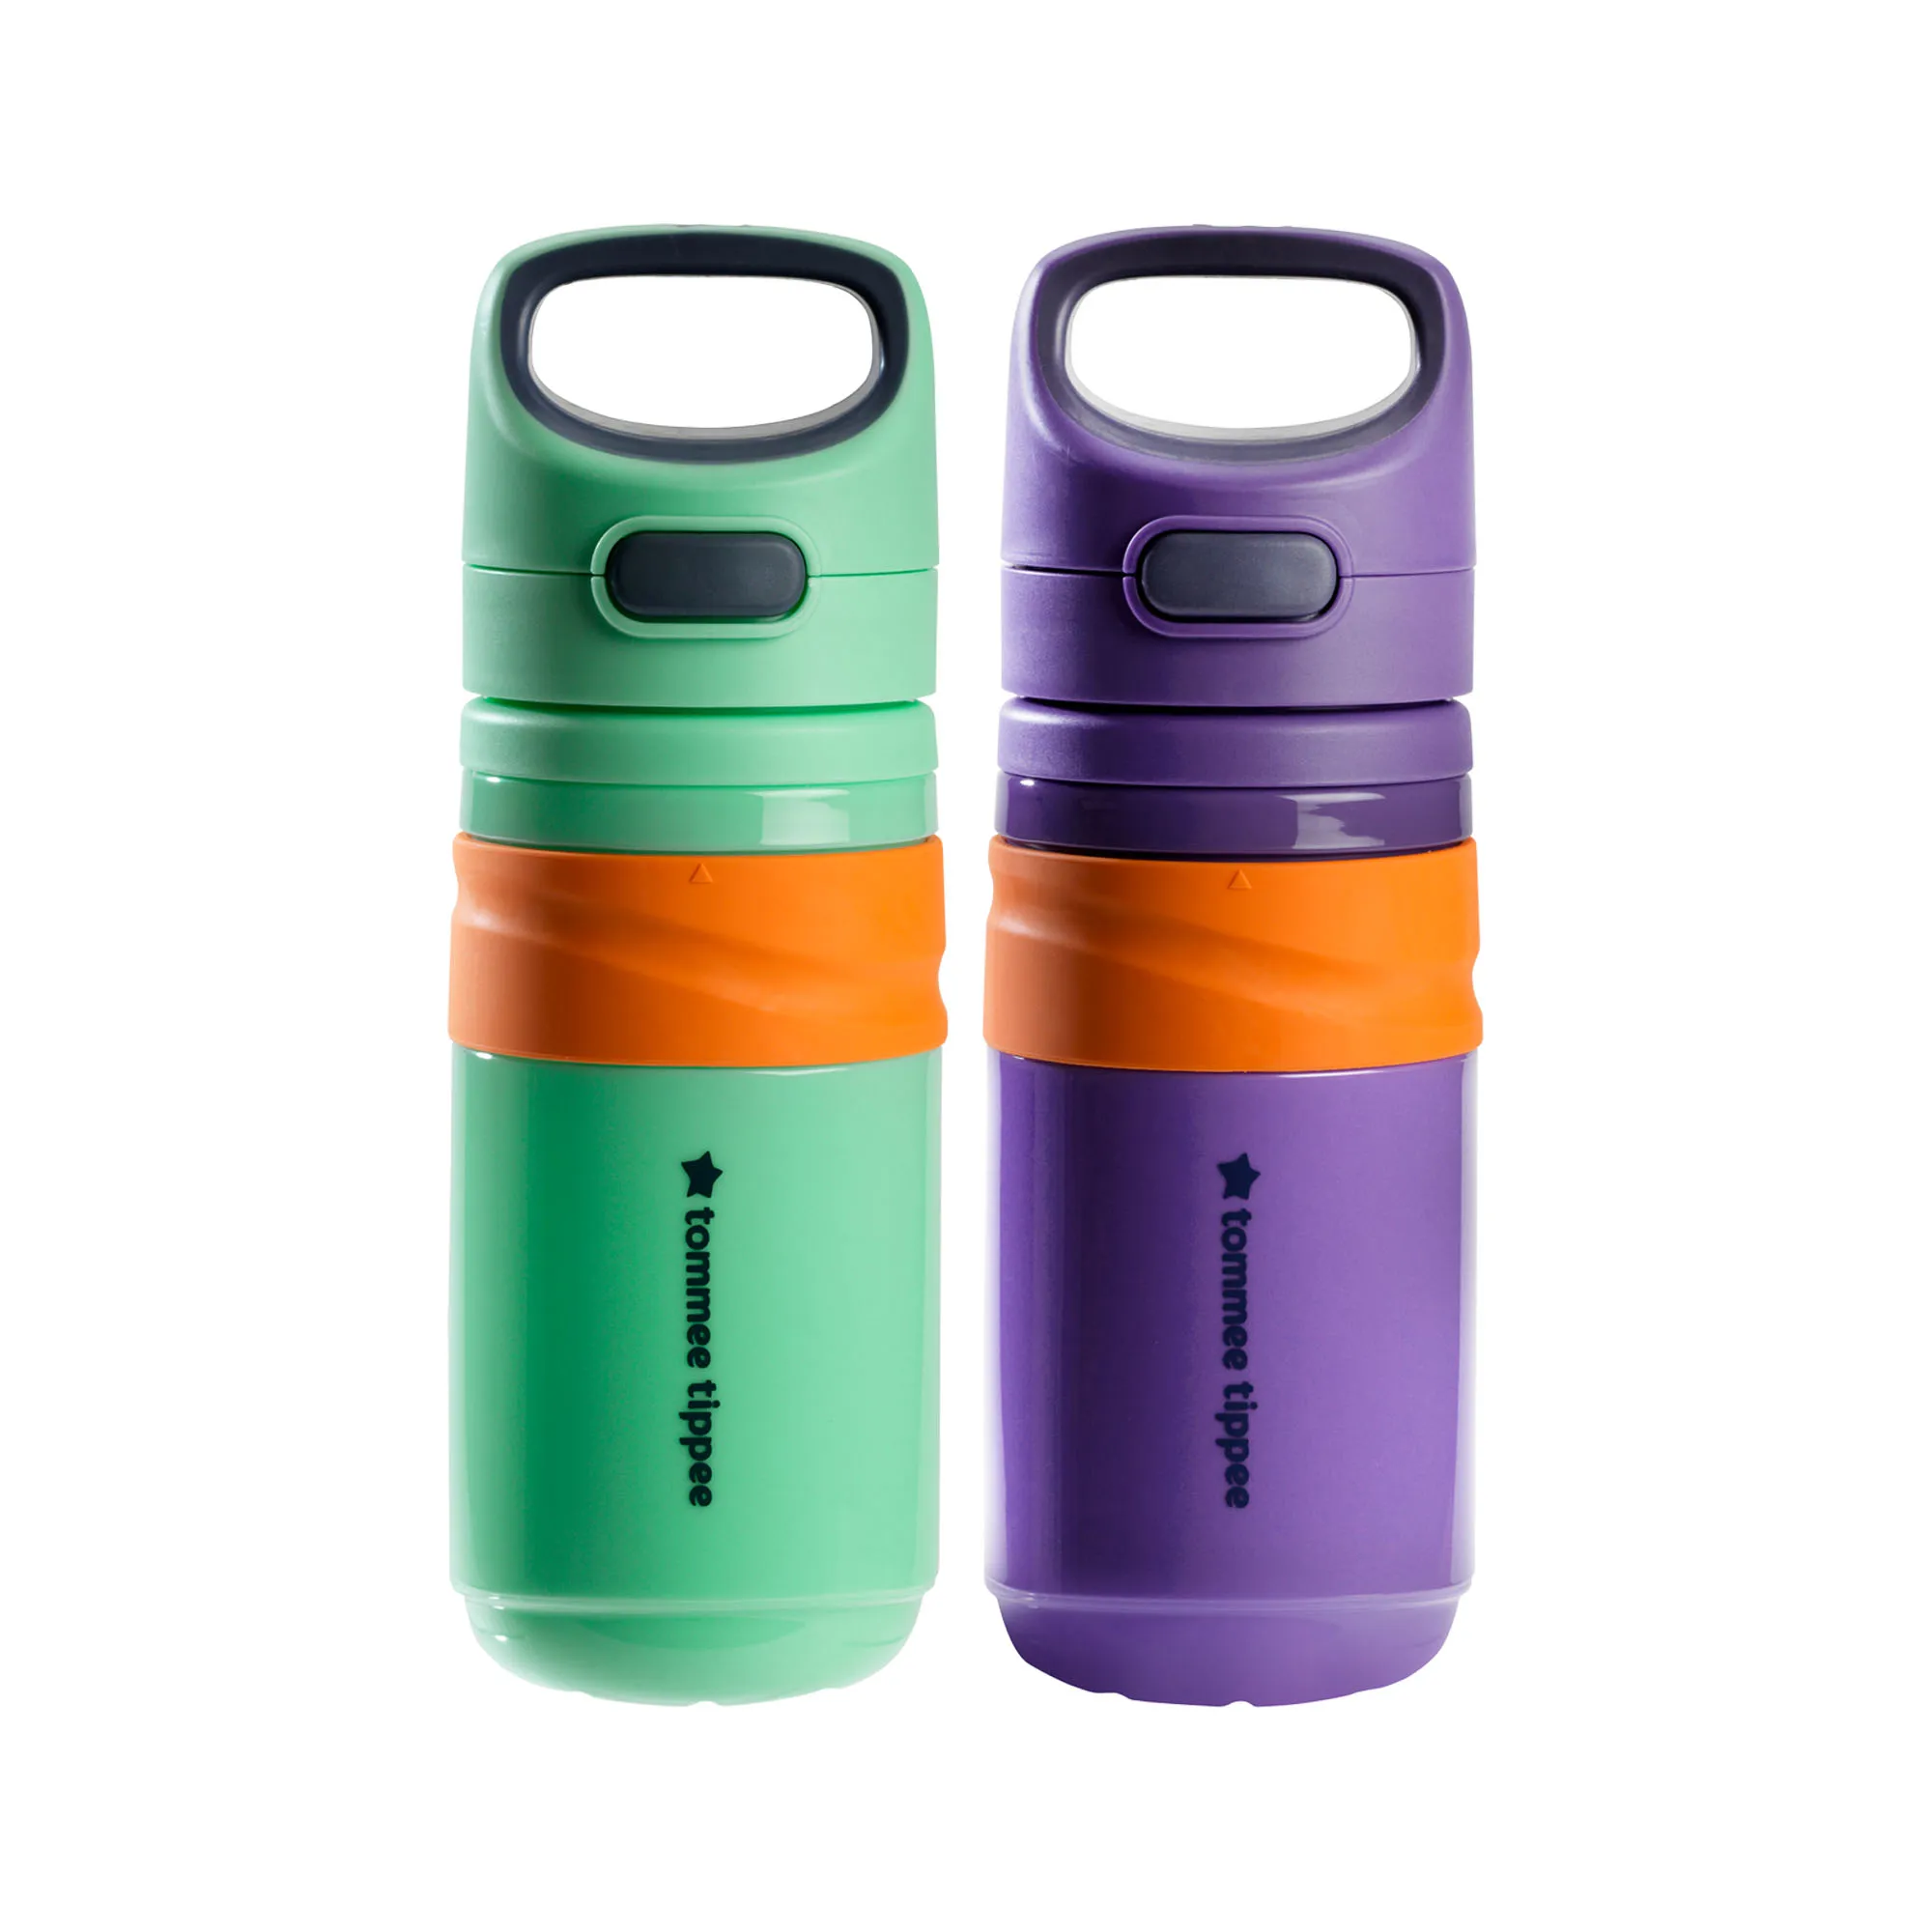 Tommee Tippee Insulated Sportee Toddler Water Bottle 2 Pack 12